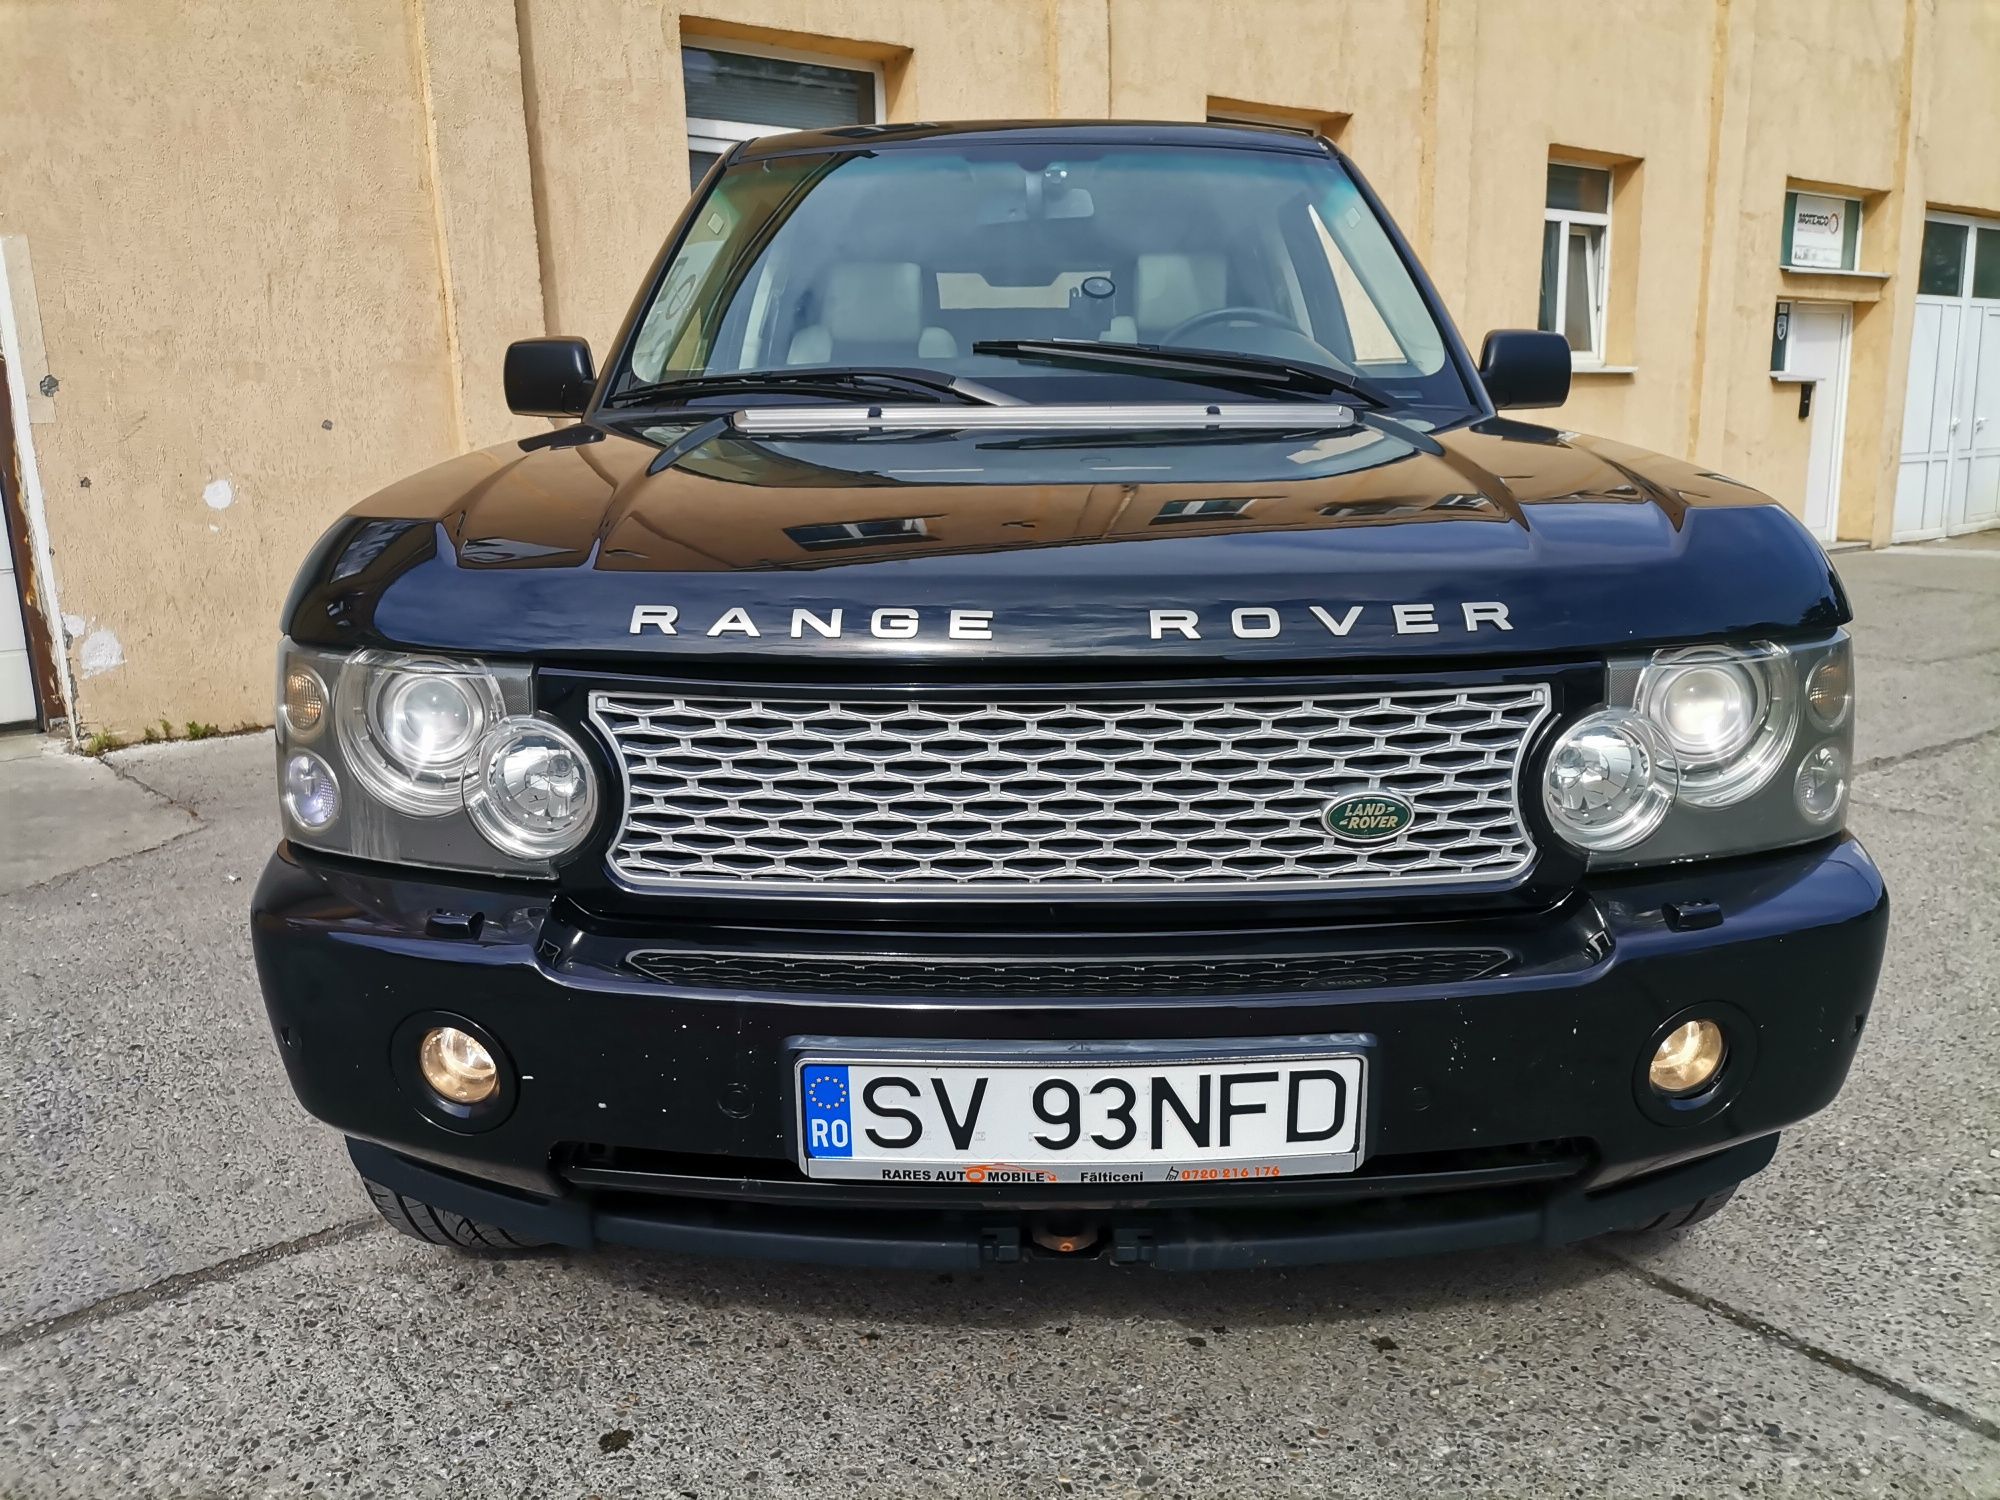 Range Rover 3.0 An 2005 Autobiography extra full